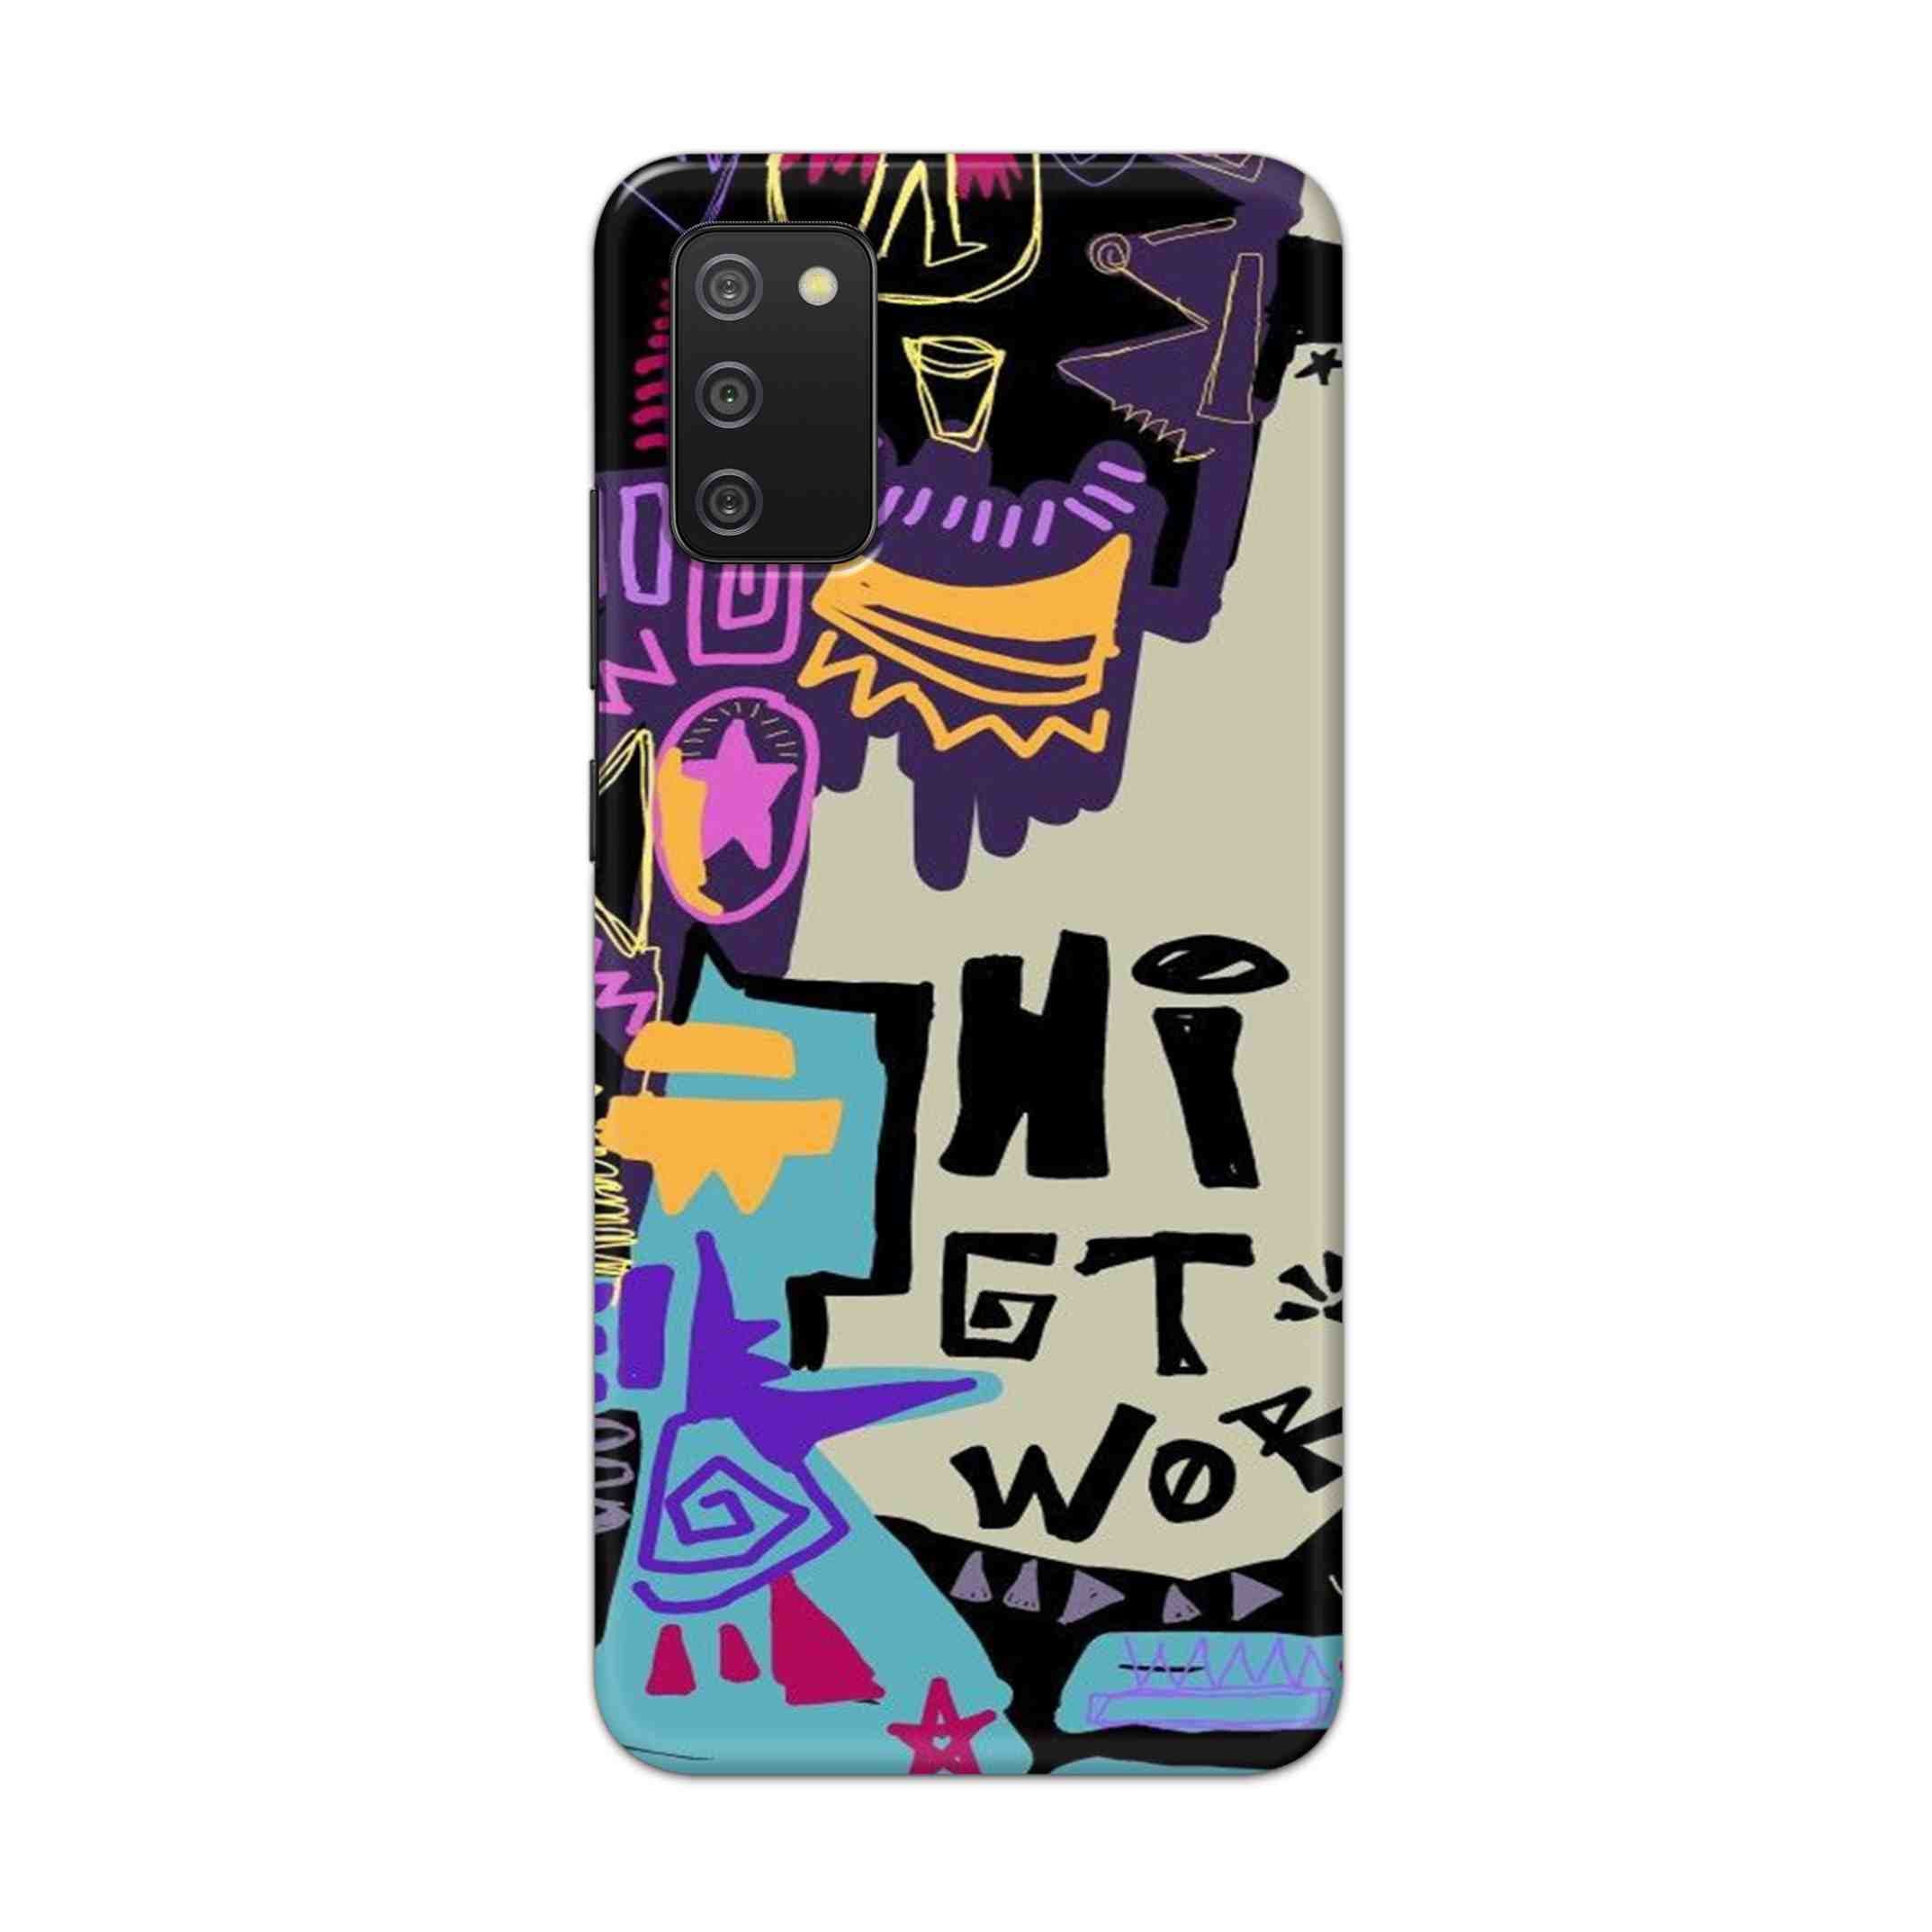 Buy Hi Gt World Hard Back Mobile Phone Case Cover For Samsung Galaxy M02s Online